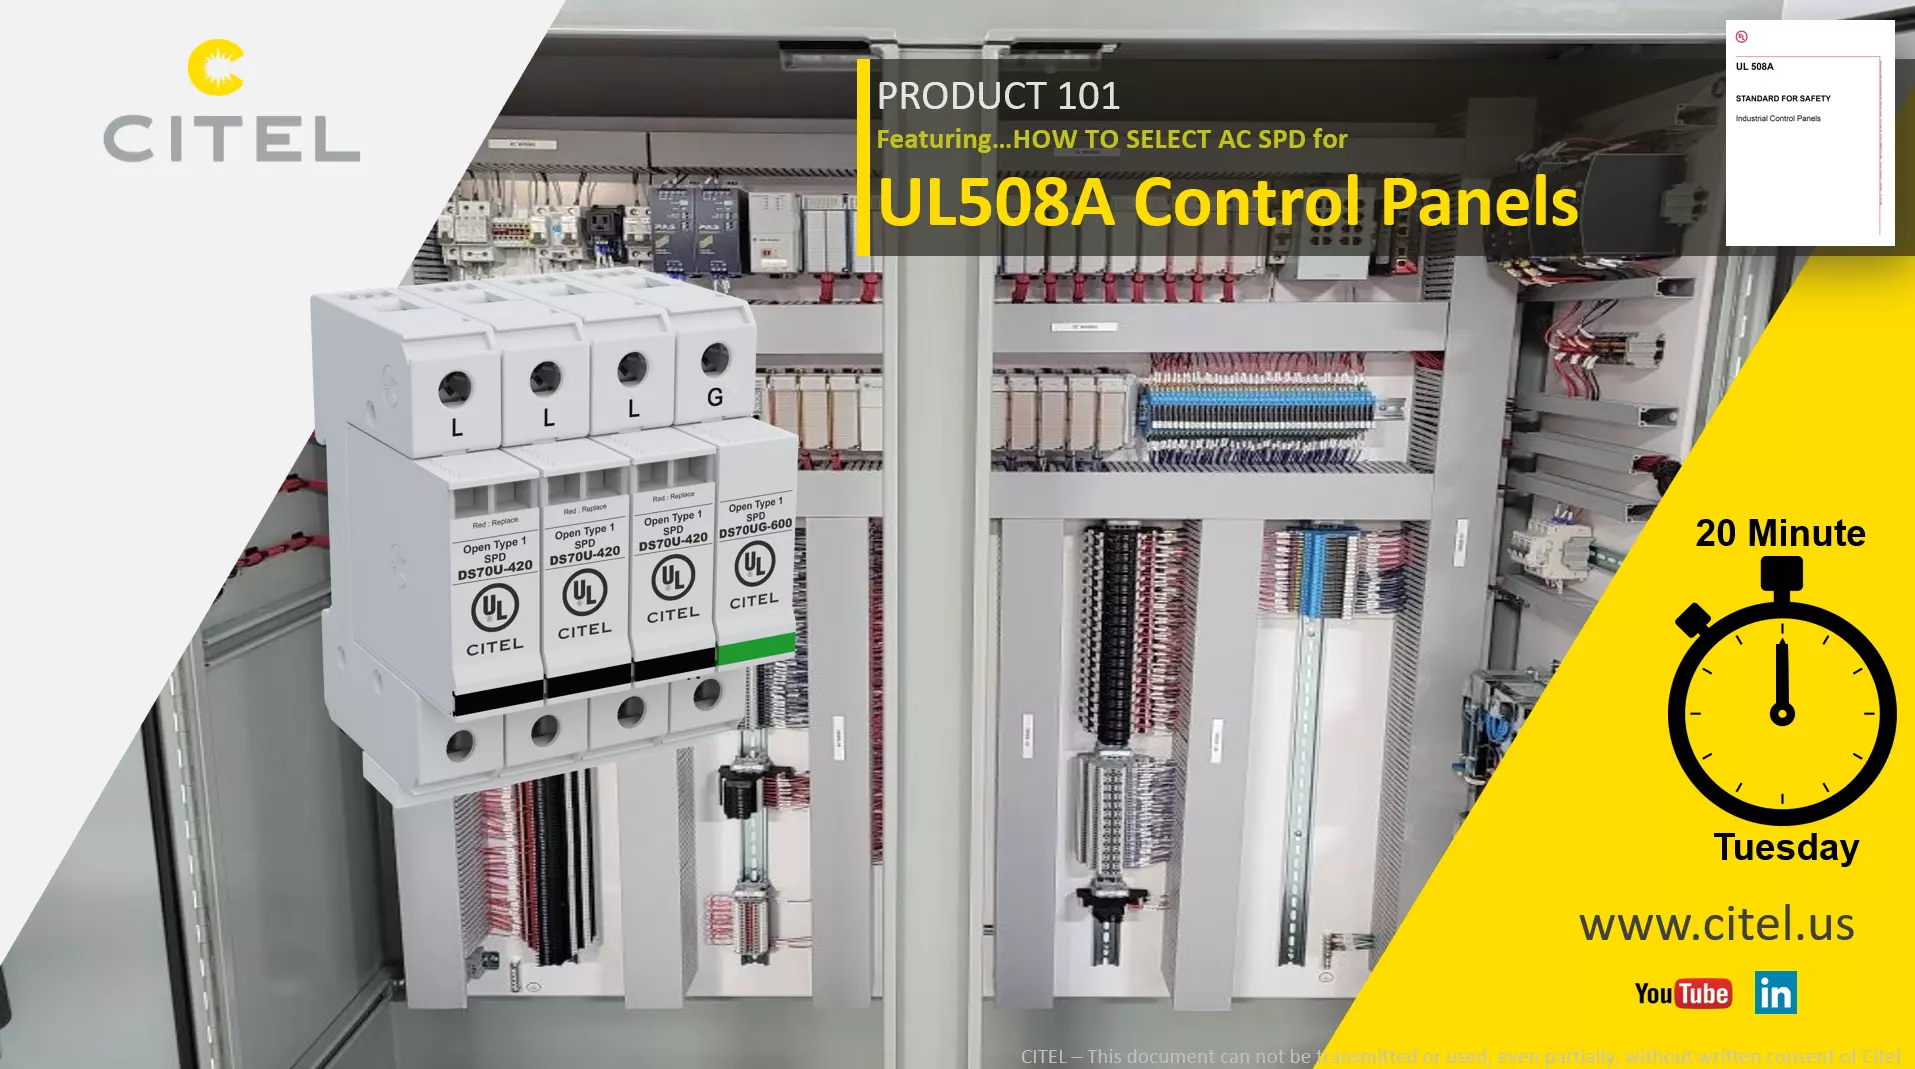 Webinar-How-To-Select-AC-SPD-for-UL508A-Control-Panels